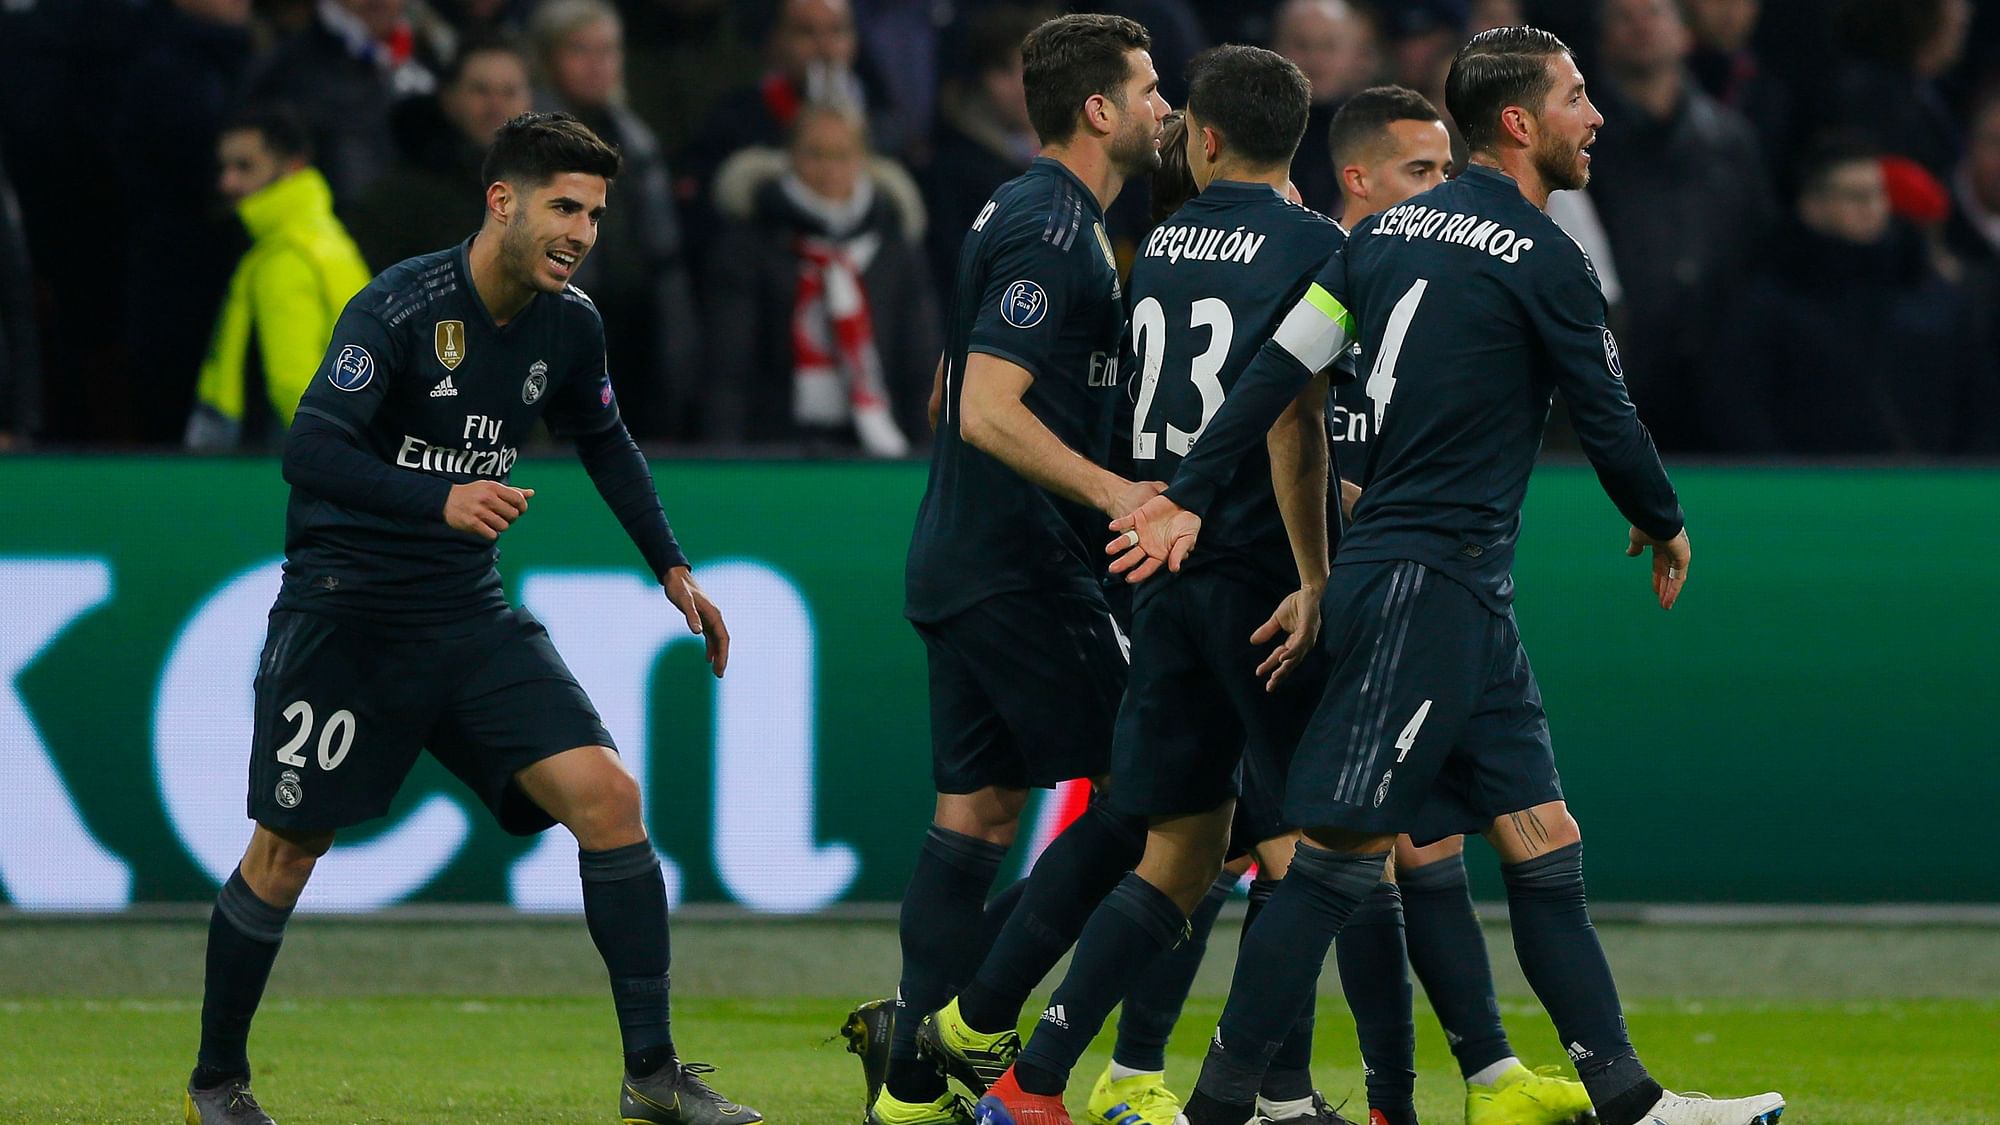 Real midfielder Marco Asensio (left) celebrates after scoring his side’s second goal during the first leg, round of sixteen, Champions League match against Ajax at the Johan Cruyff Arena in Amsterdam, Netherlands on Wednesday Feb. 13, 2019.